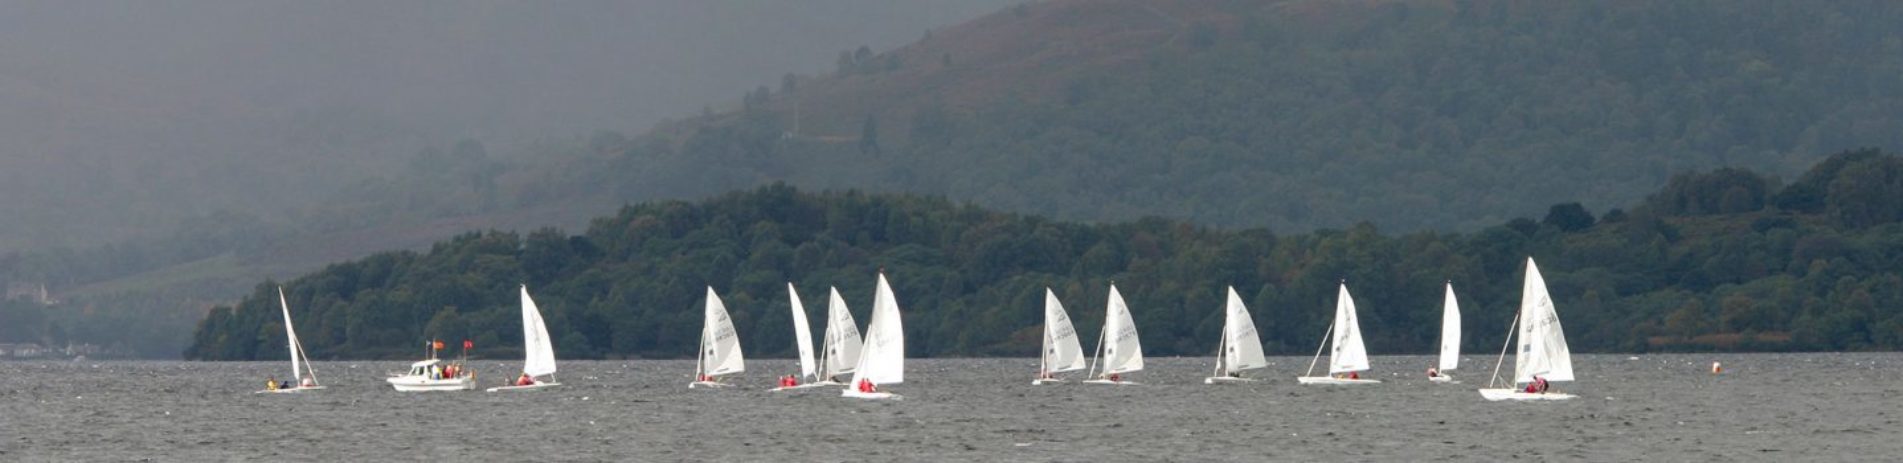 numerous-white-veil-sailing-boats-on-loch-lomond-wooded-shore-behind